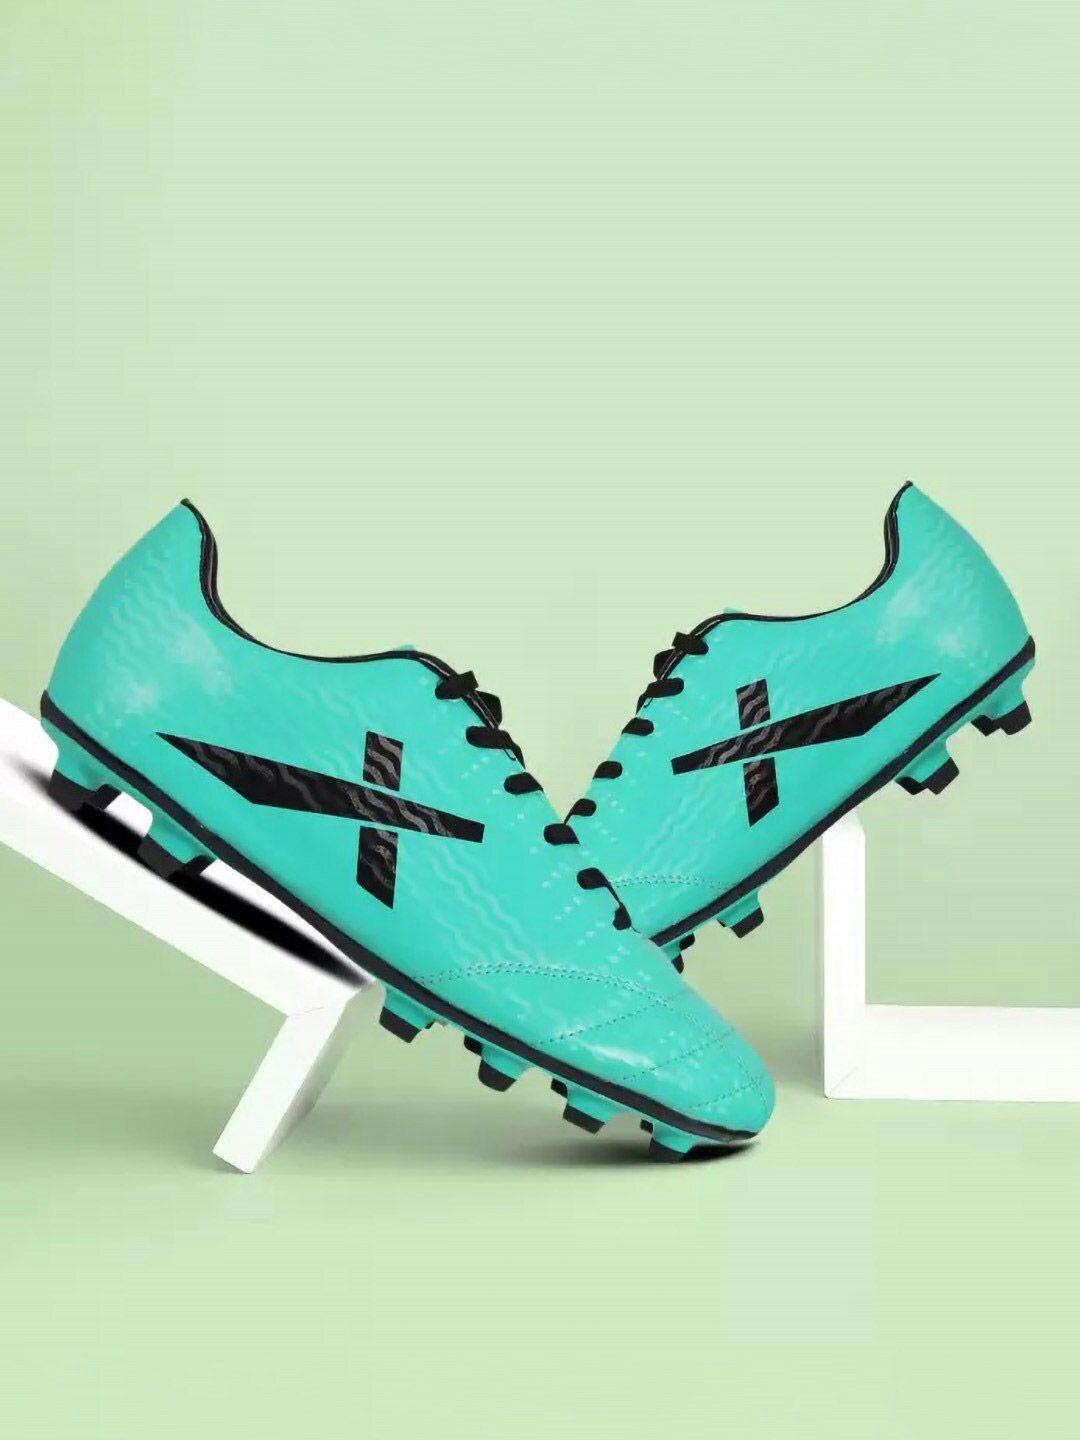 vector x unisex printed football shoes